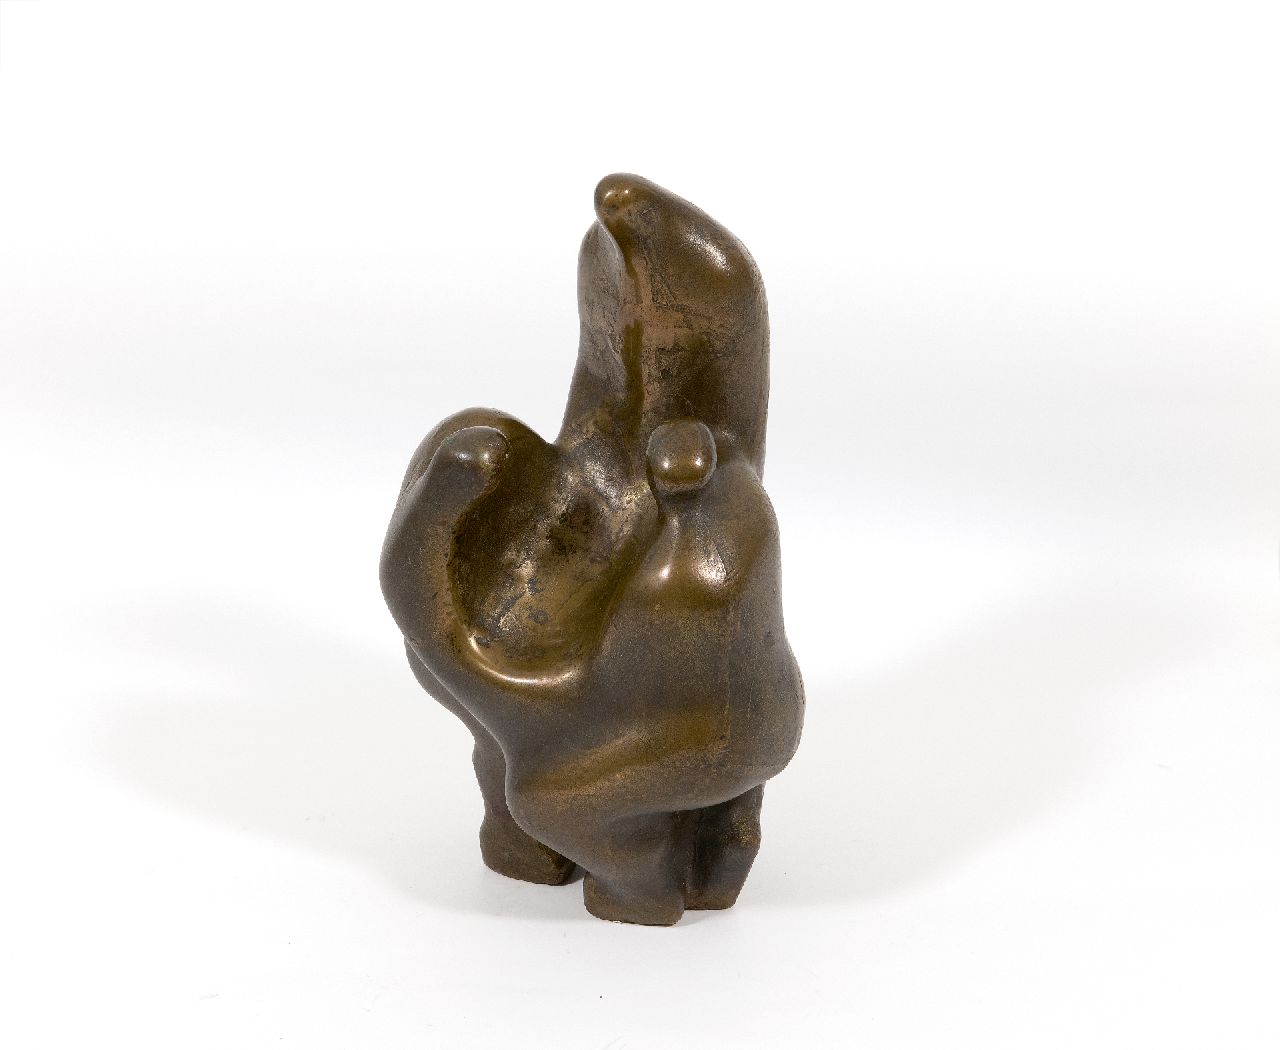 Jonker W.  | Willem 'Wim' Jonker | Sculptures and objects offered for sale | The Emmaus goers, bronze 33.0 cm, signed on the bottom